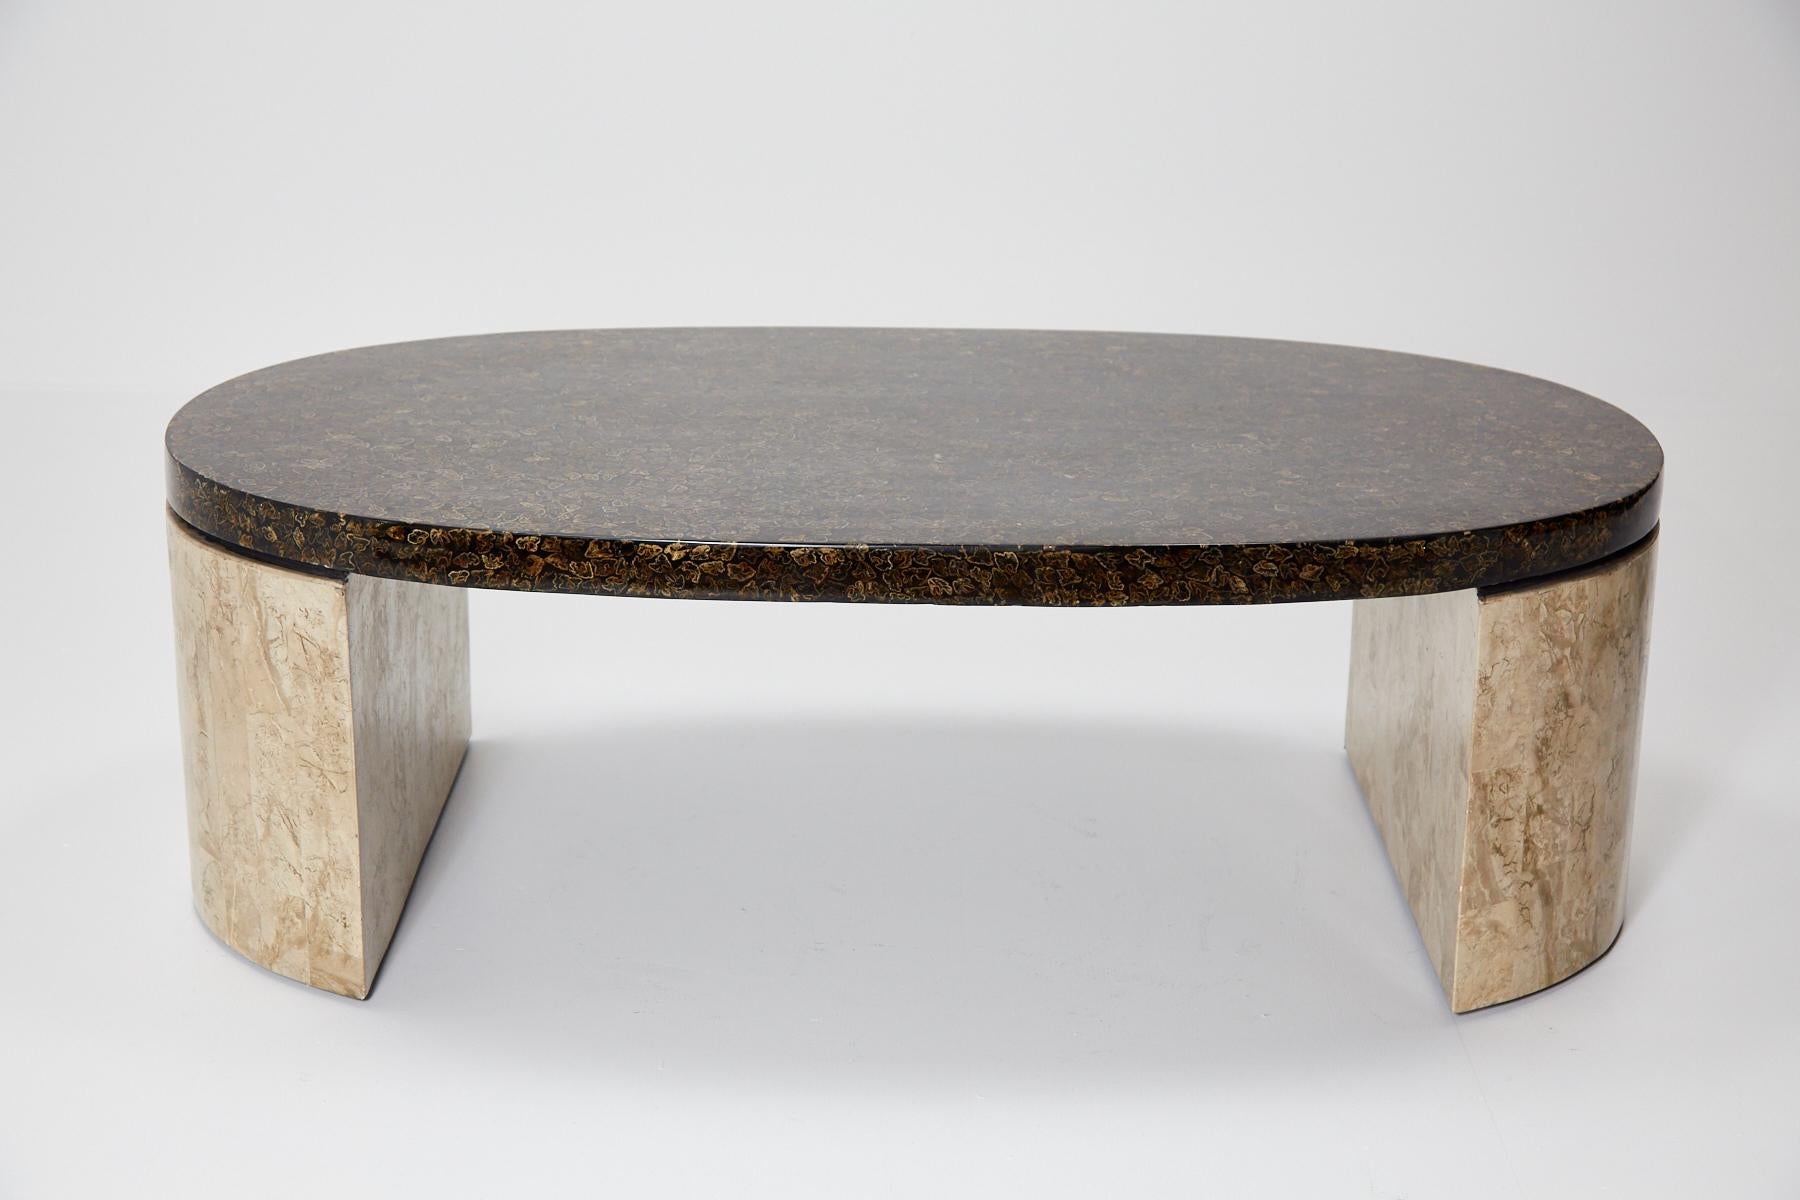 Contemporary lacquered coffee table comprised of an oval tabletop with fern tassel inlay finish and tessellated cantor stone legs. Fiberglass body.

All furnishings are made from 100% natural materials, carefully hand cut and crafted piece-by-piece